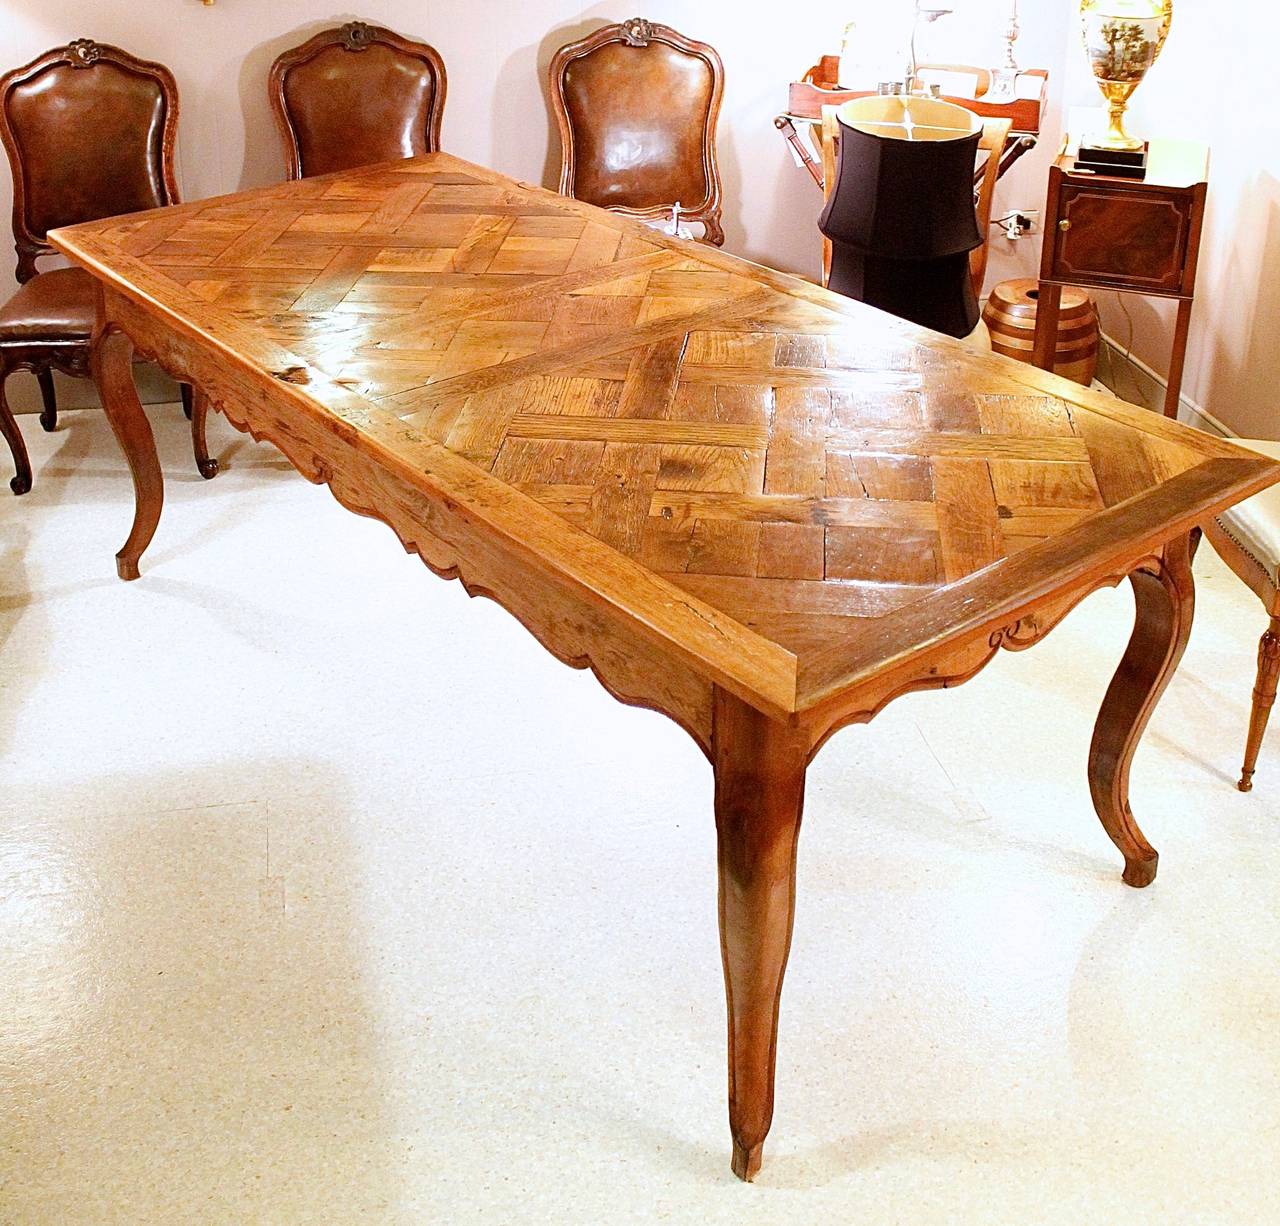 A provincial style French farm table composed of antique elements: the top being re-purposed parquet de Versailles flooring, fit to a table base with boldly out-swept cabriole legs supporting the frame with its attractively shaped rails. The table